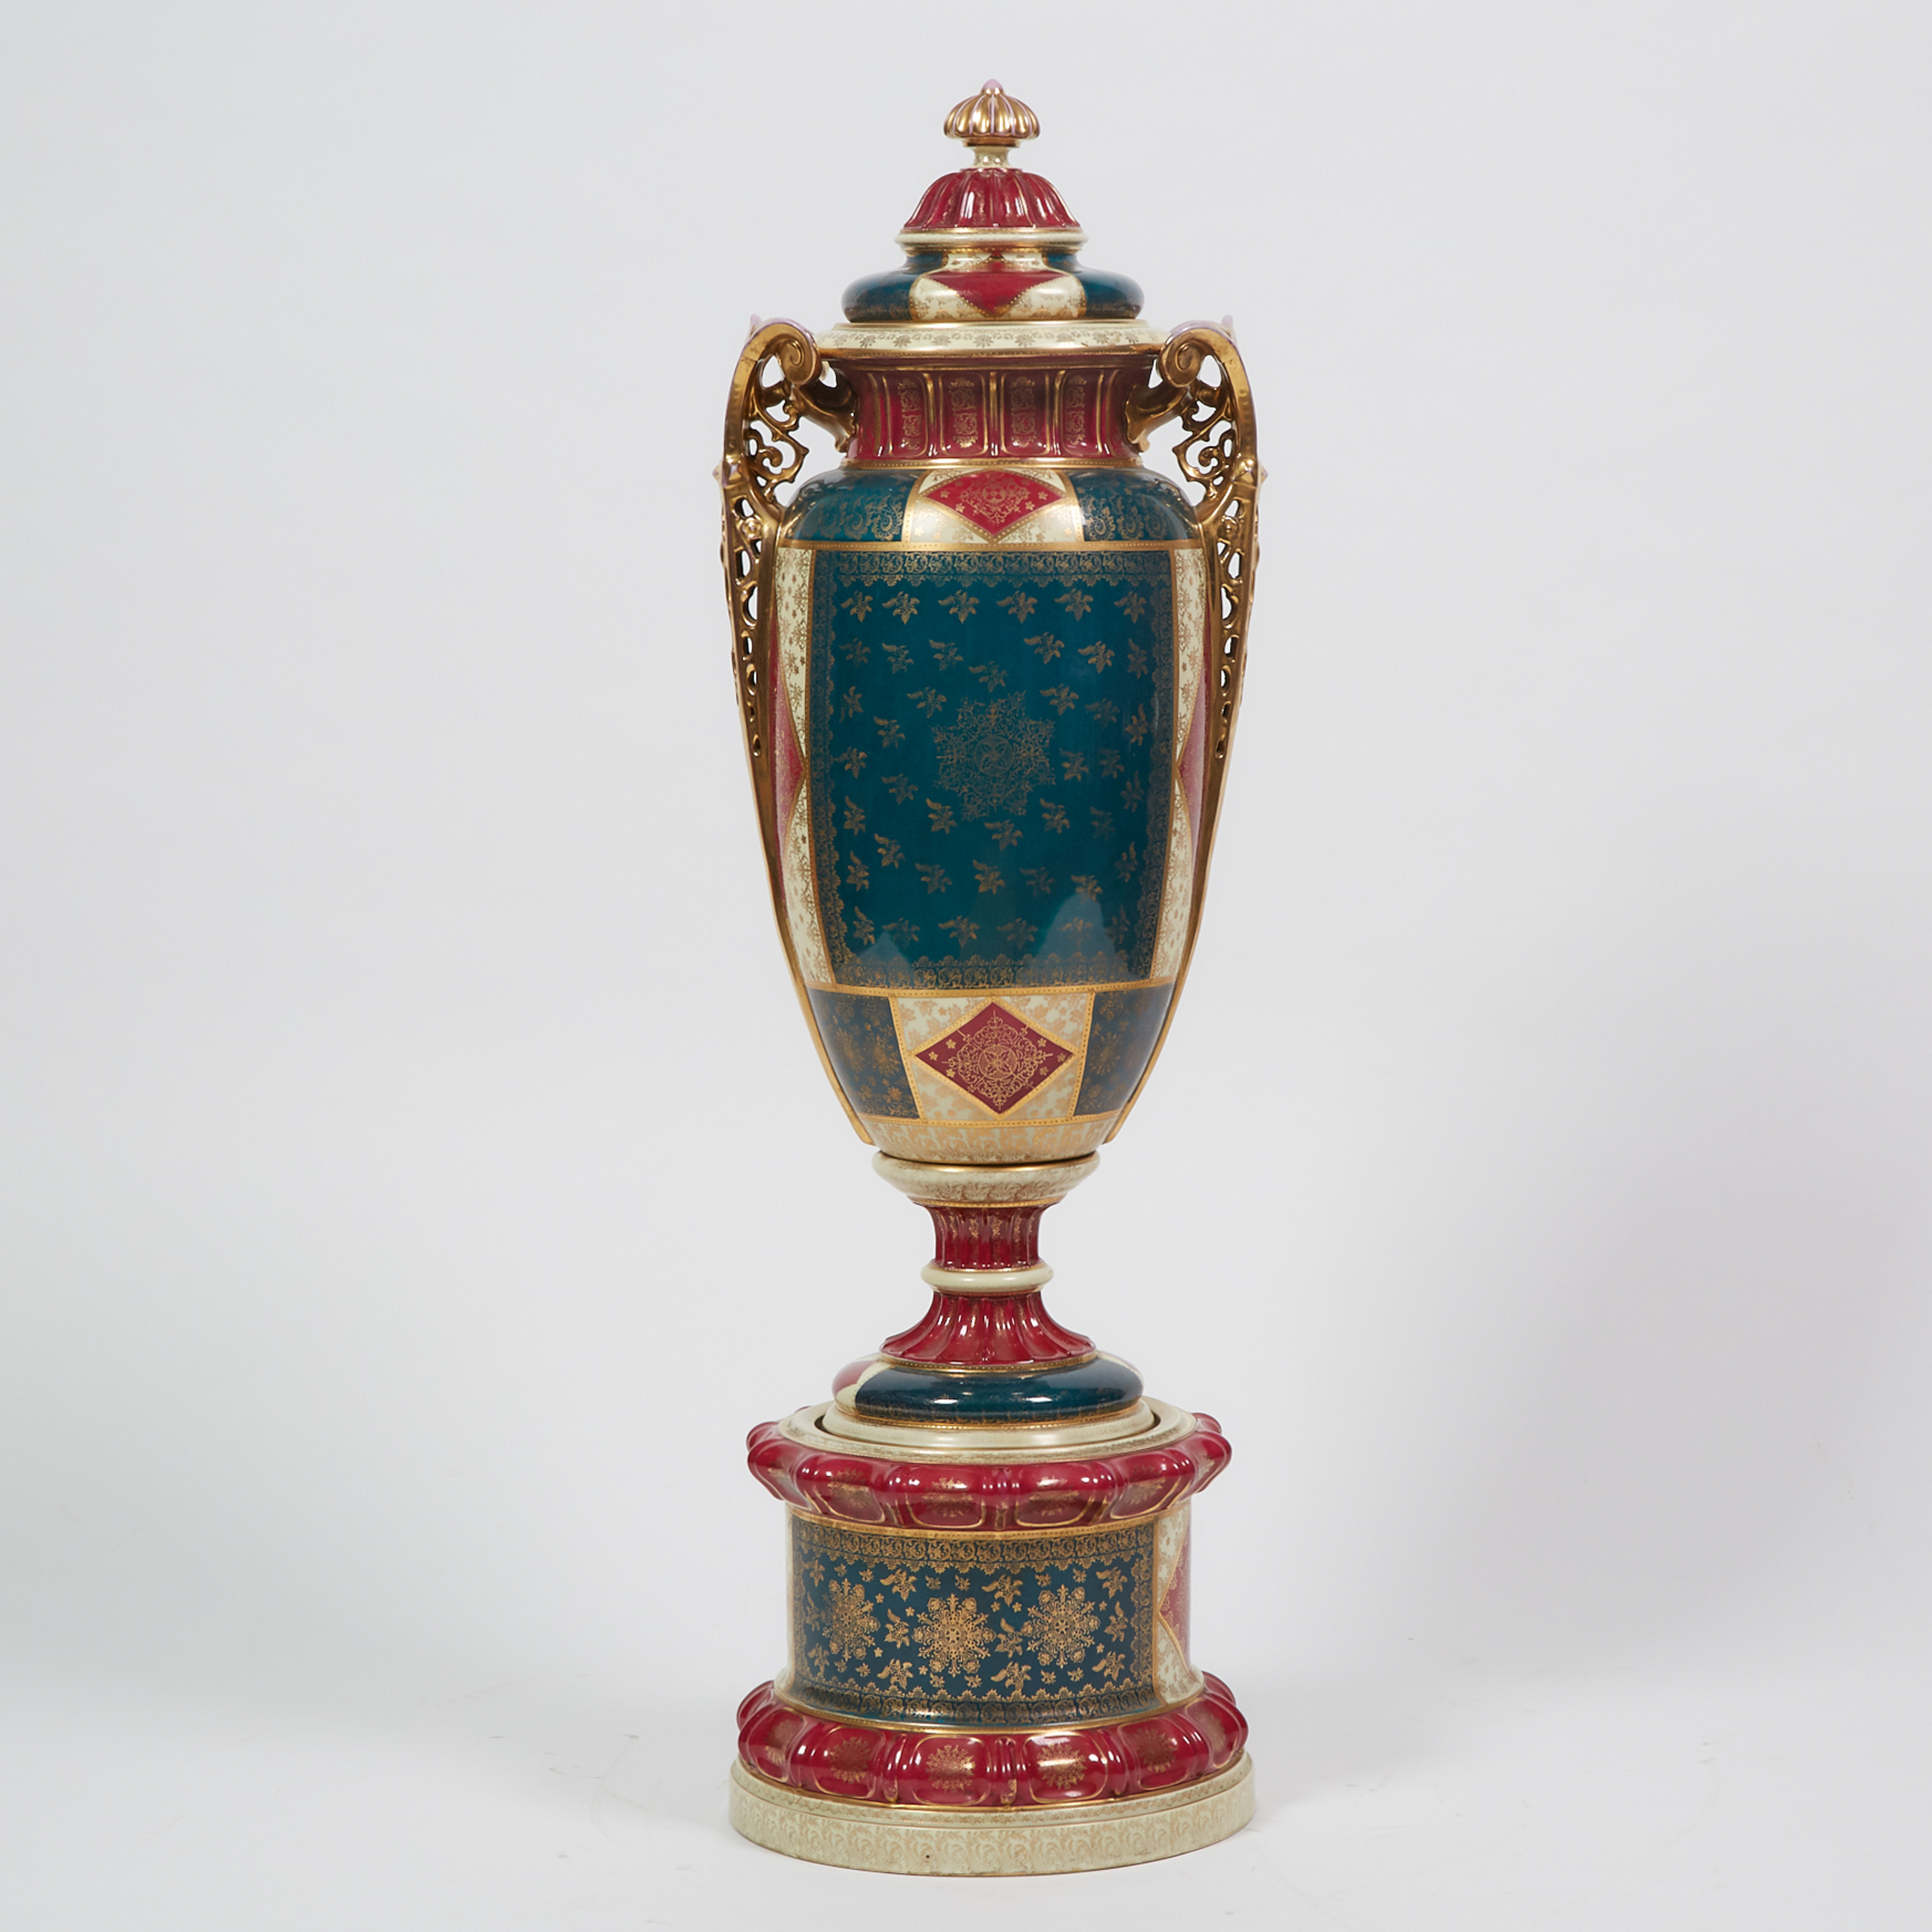 Massive 'Vienna' Two-Handled Vase and Cover, early 20th century